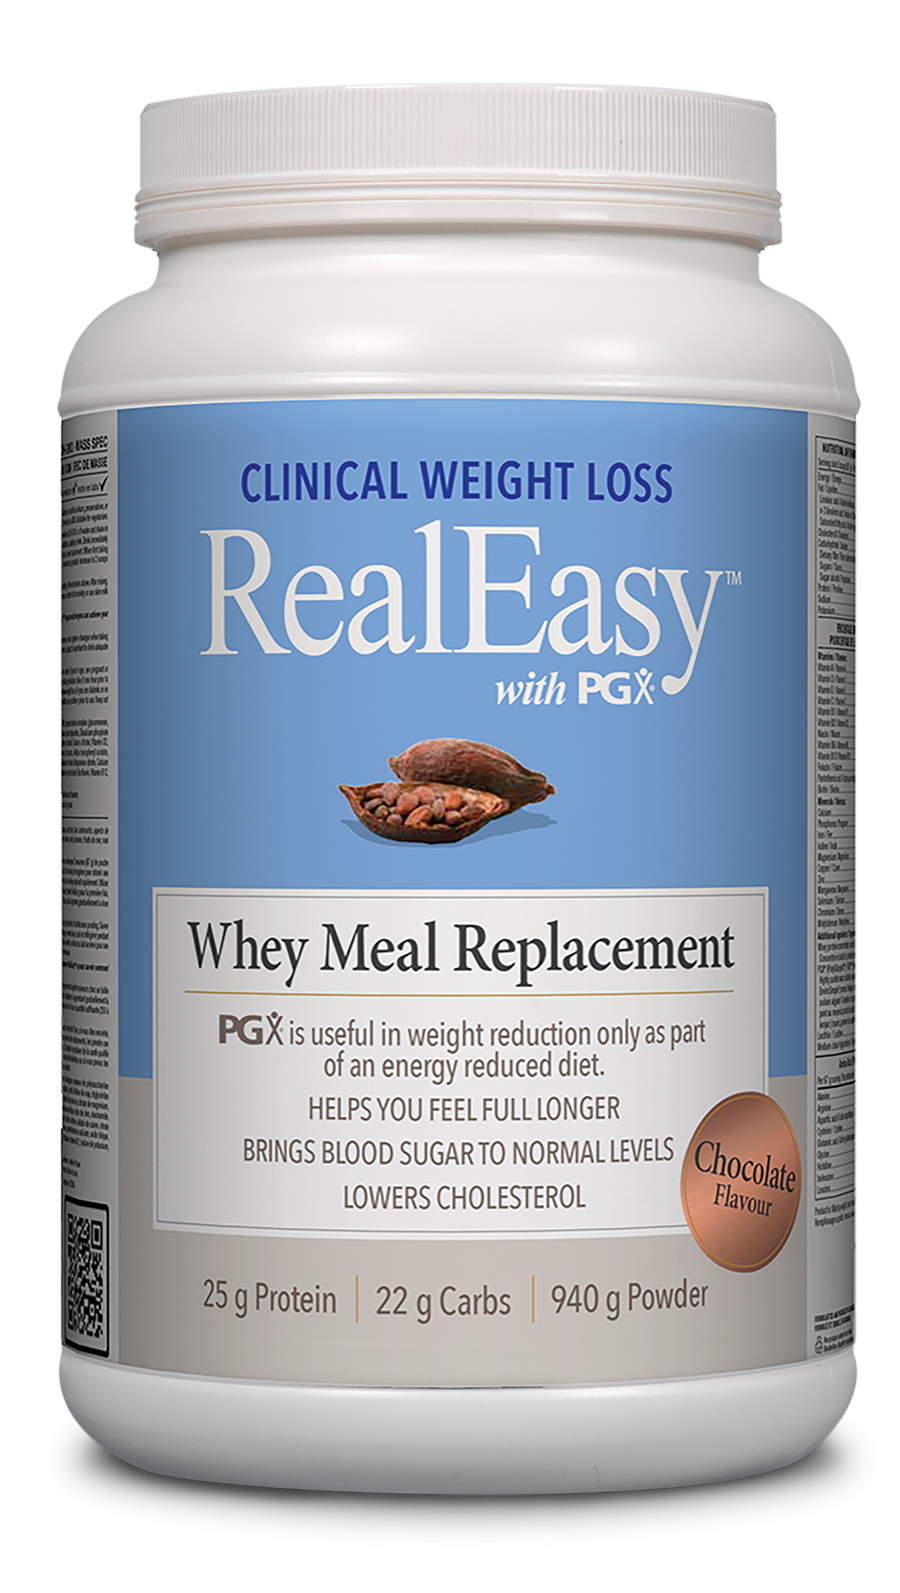 Natural Factors RealEasy with PGX Whey Meal Replacement, Chocolate Flavour 940 g Powder